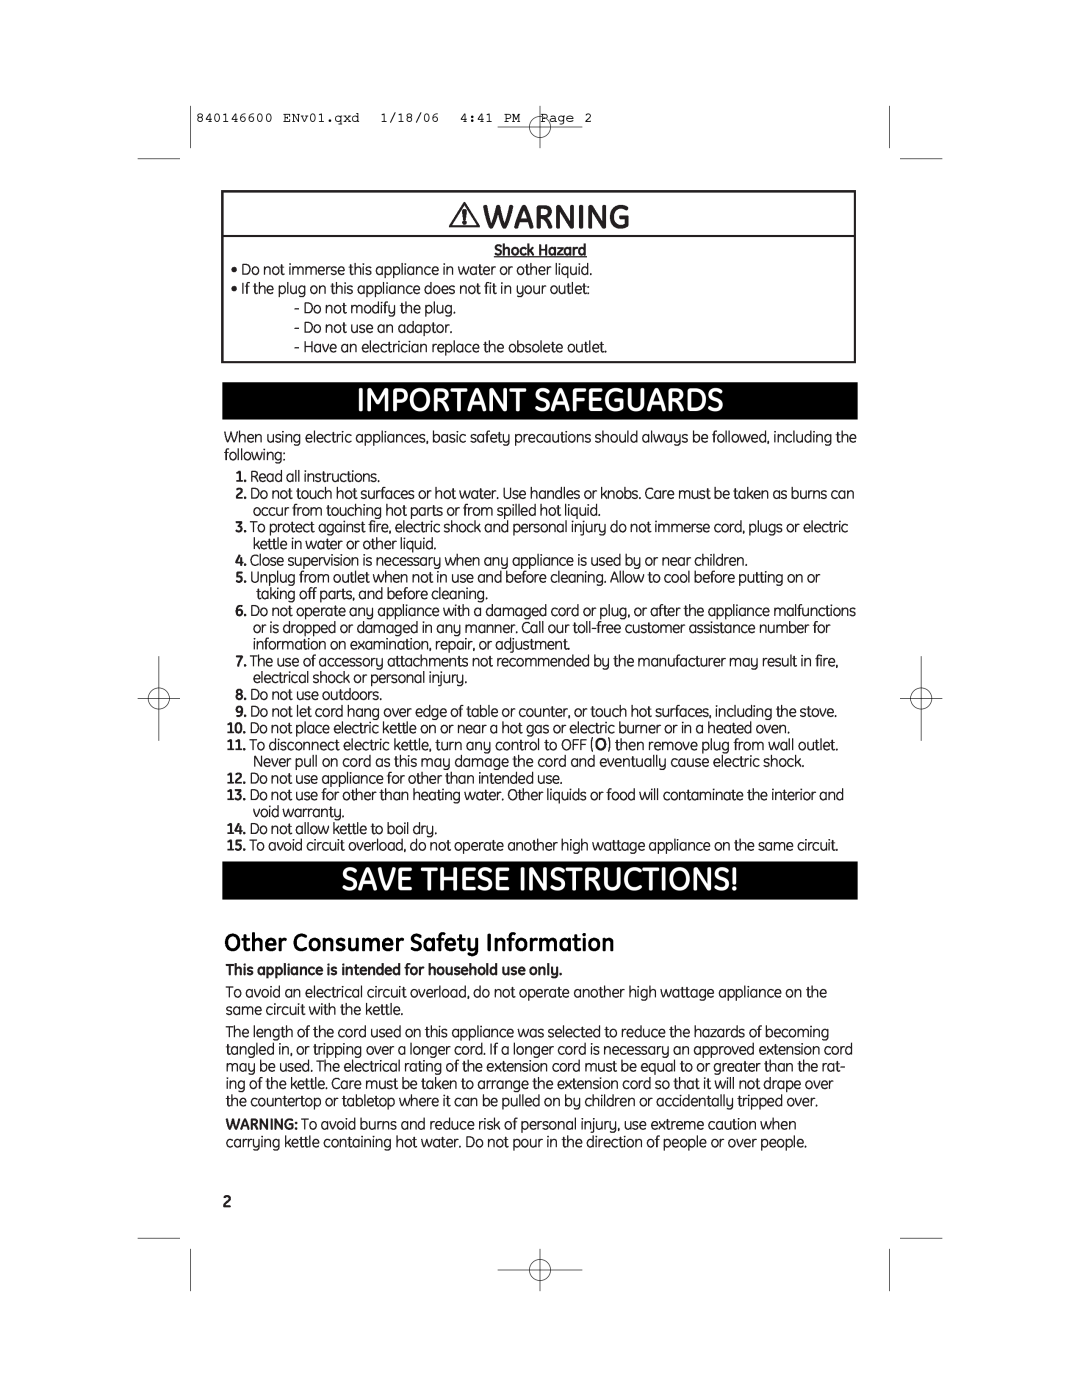 GE 840146600, 168950 manual Important Safeguards, Save These Instructions, Other Consumer Safety Information, Shock Hazard 